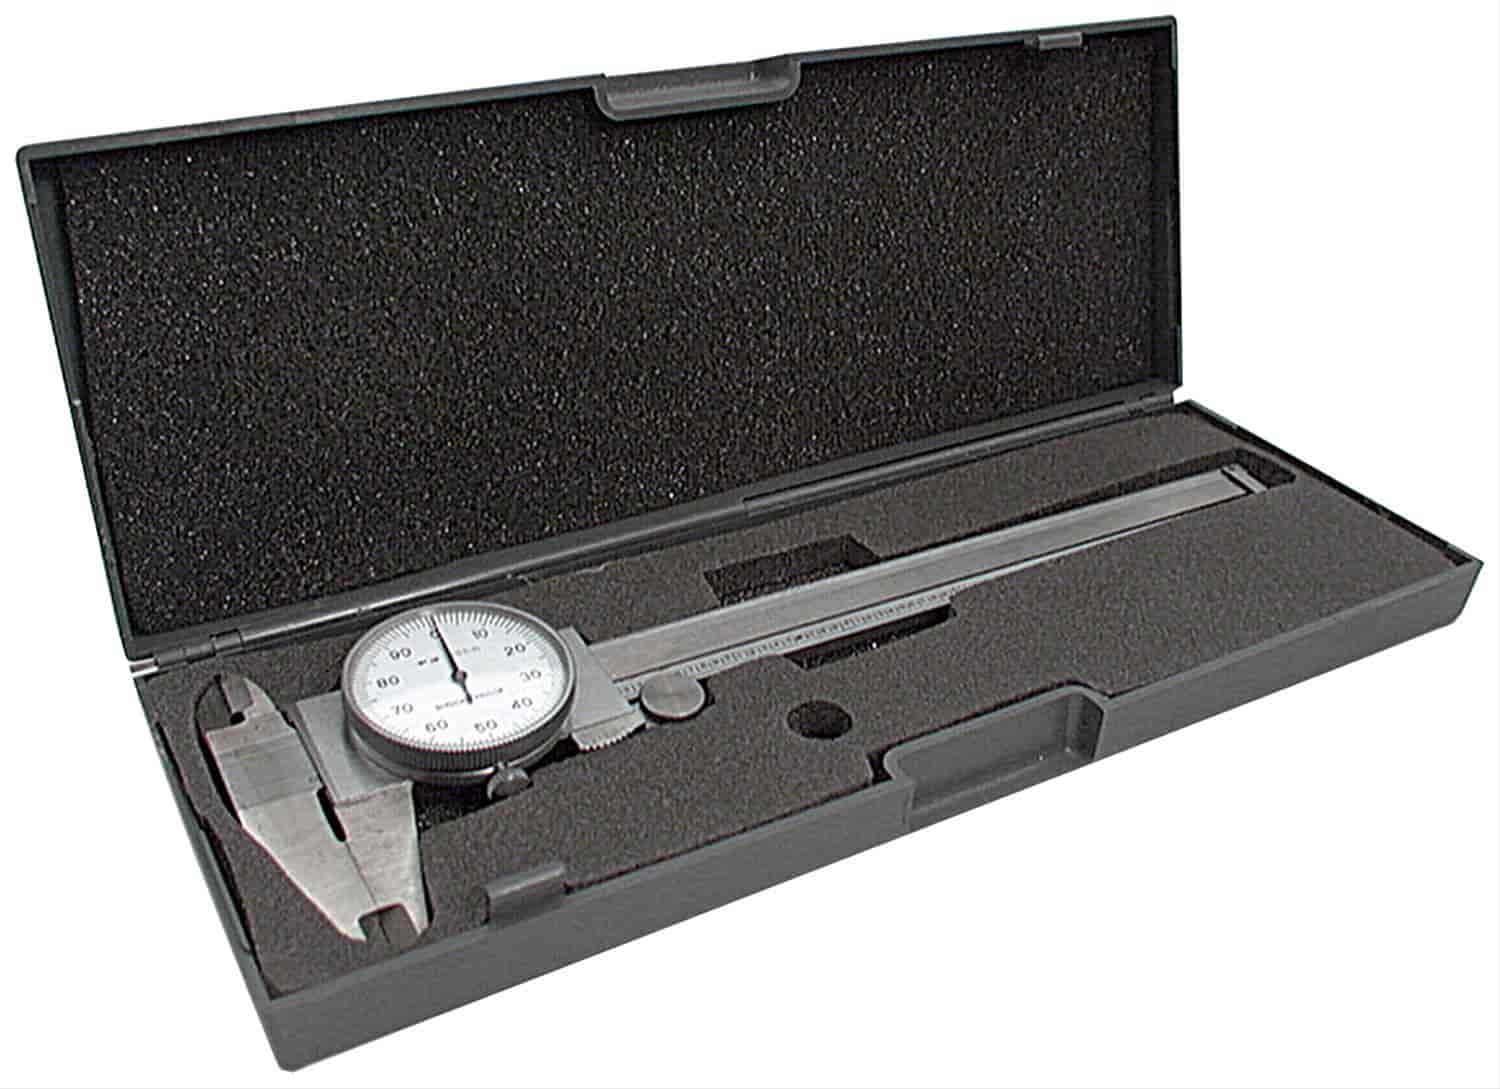 Dial Caliper Measures up to 6